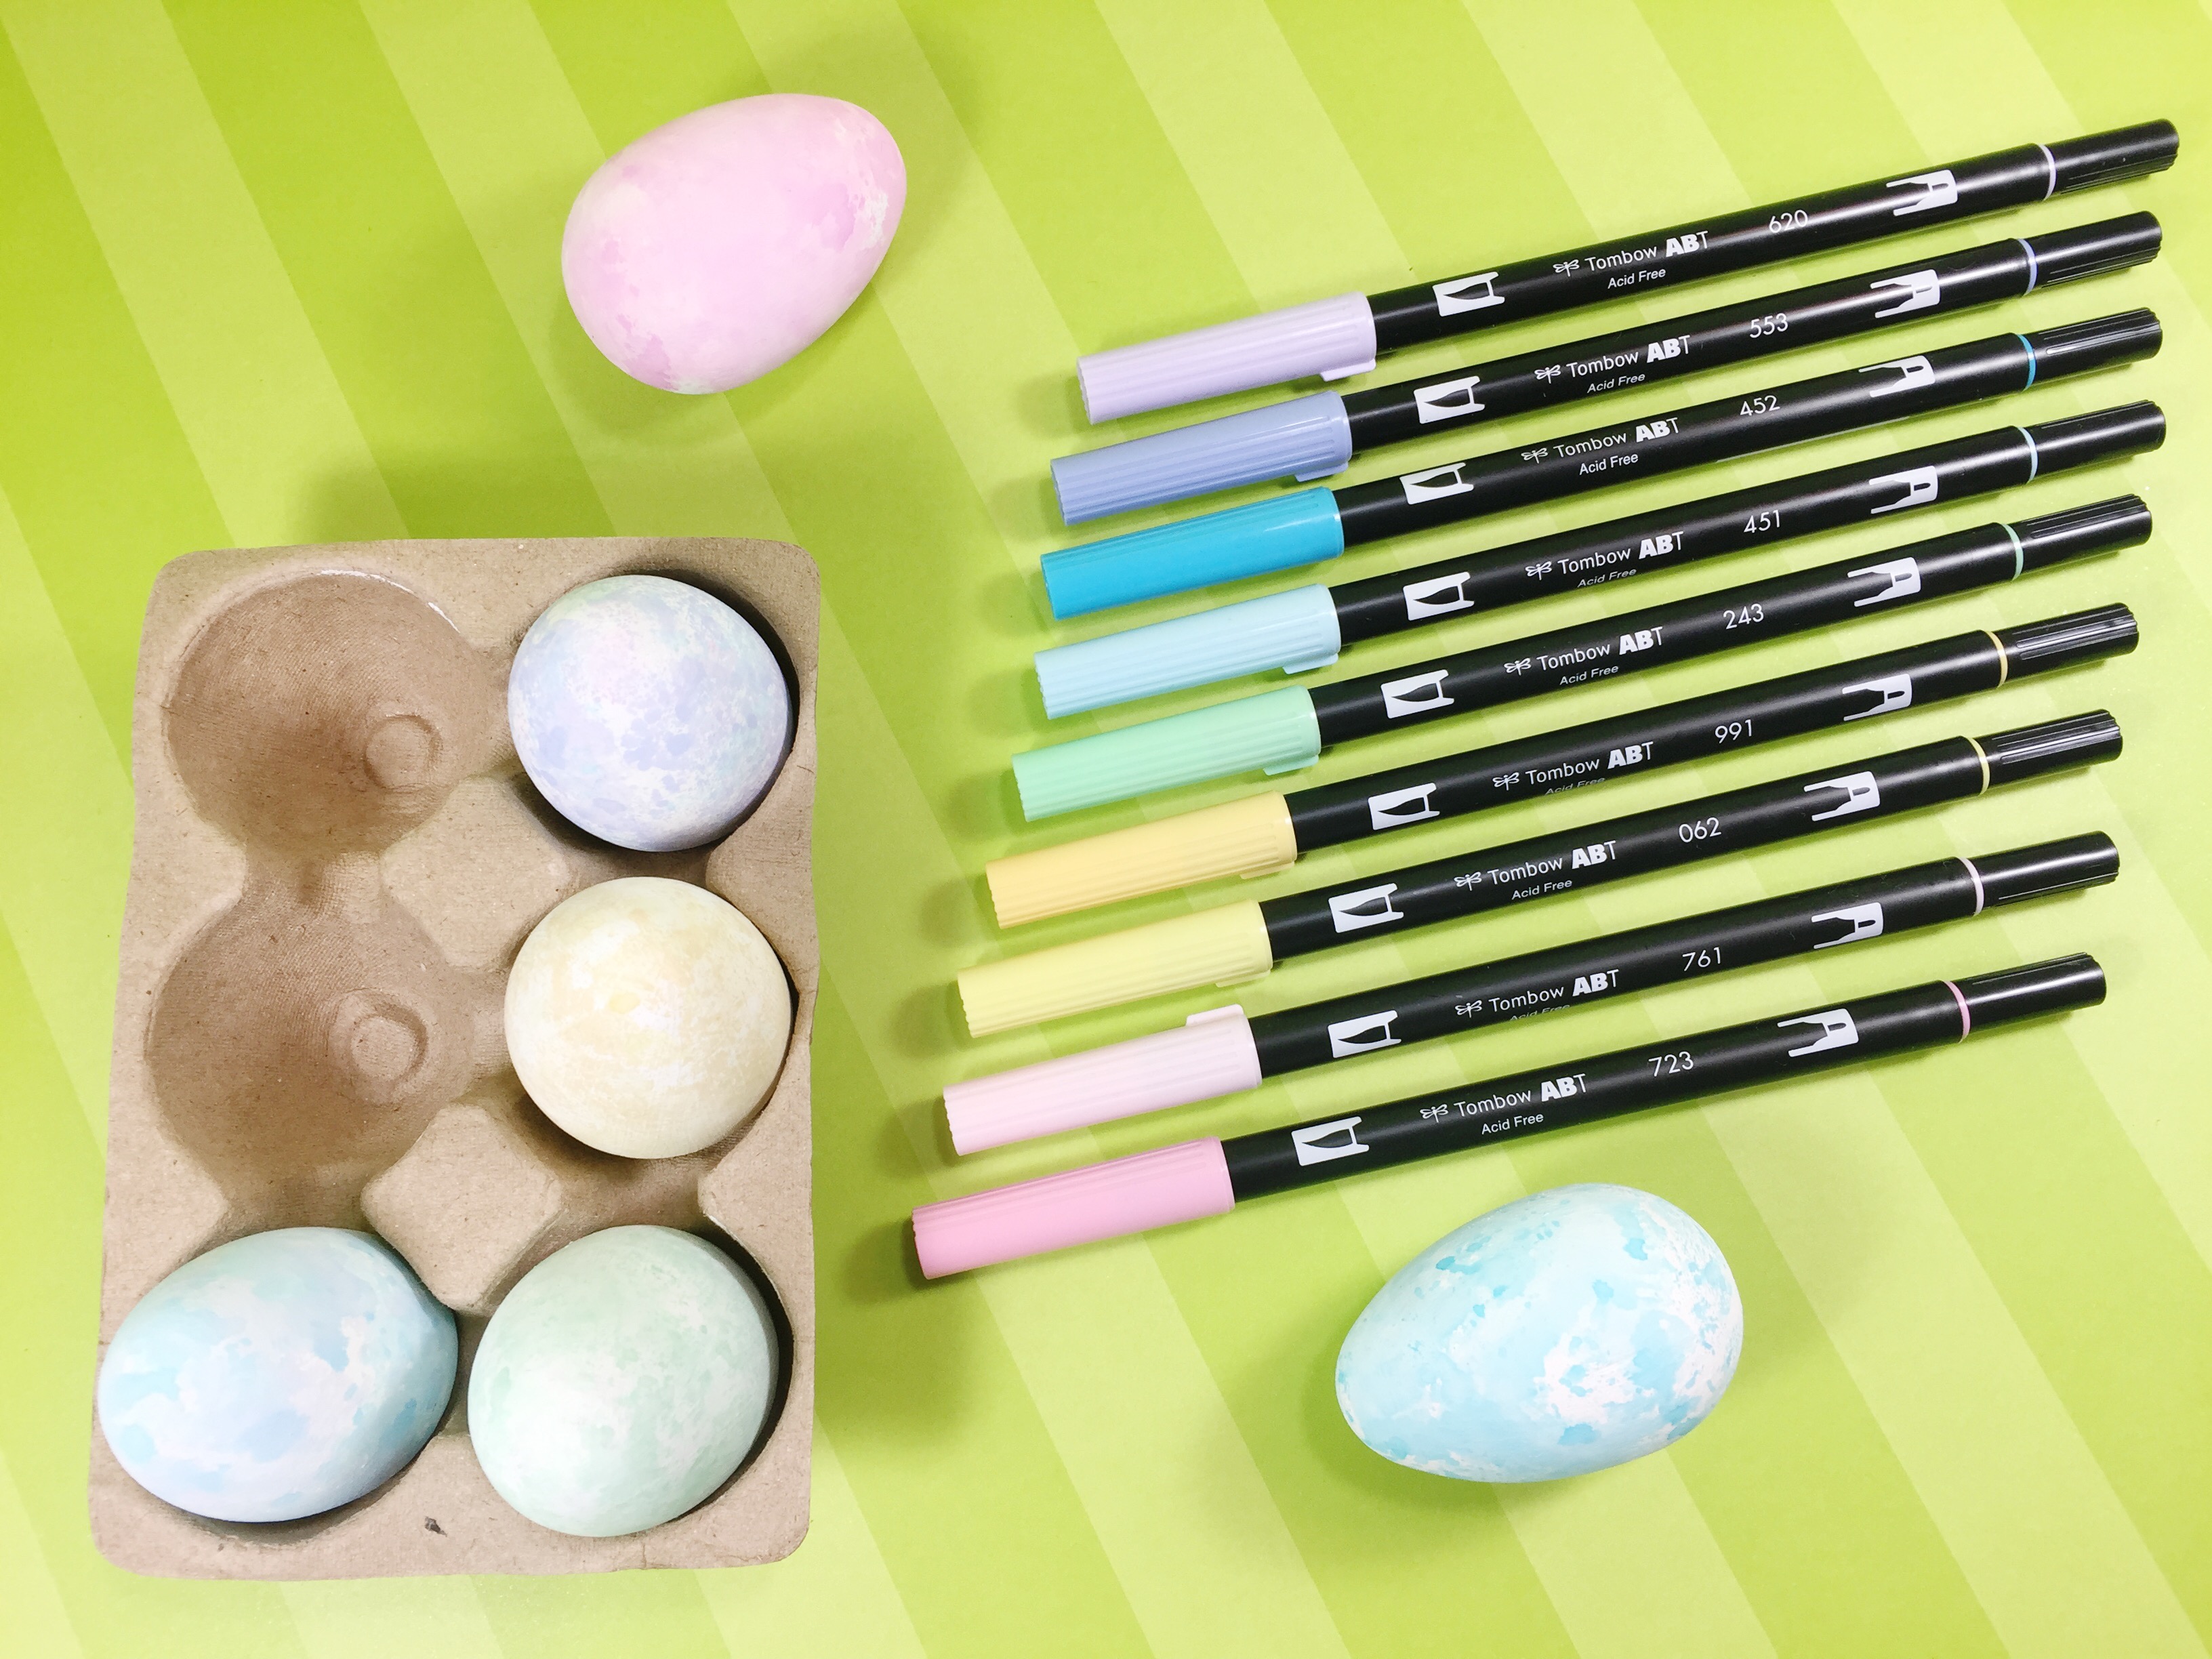 How to create watercolor Easter Eggs with Tombow Dual Brush Pens